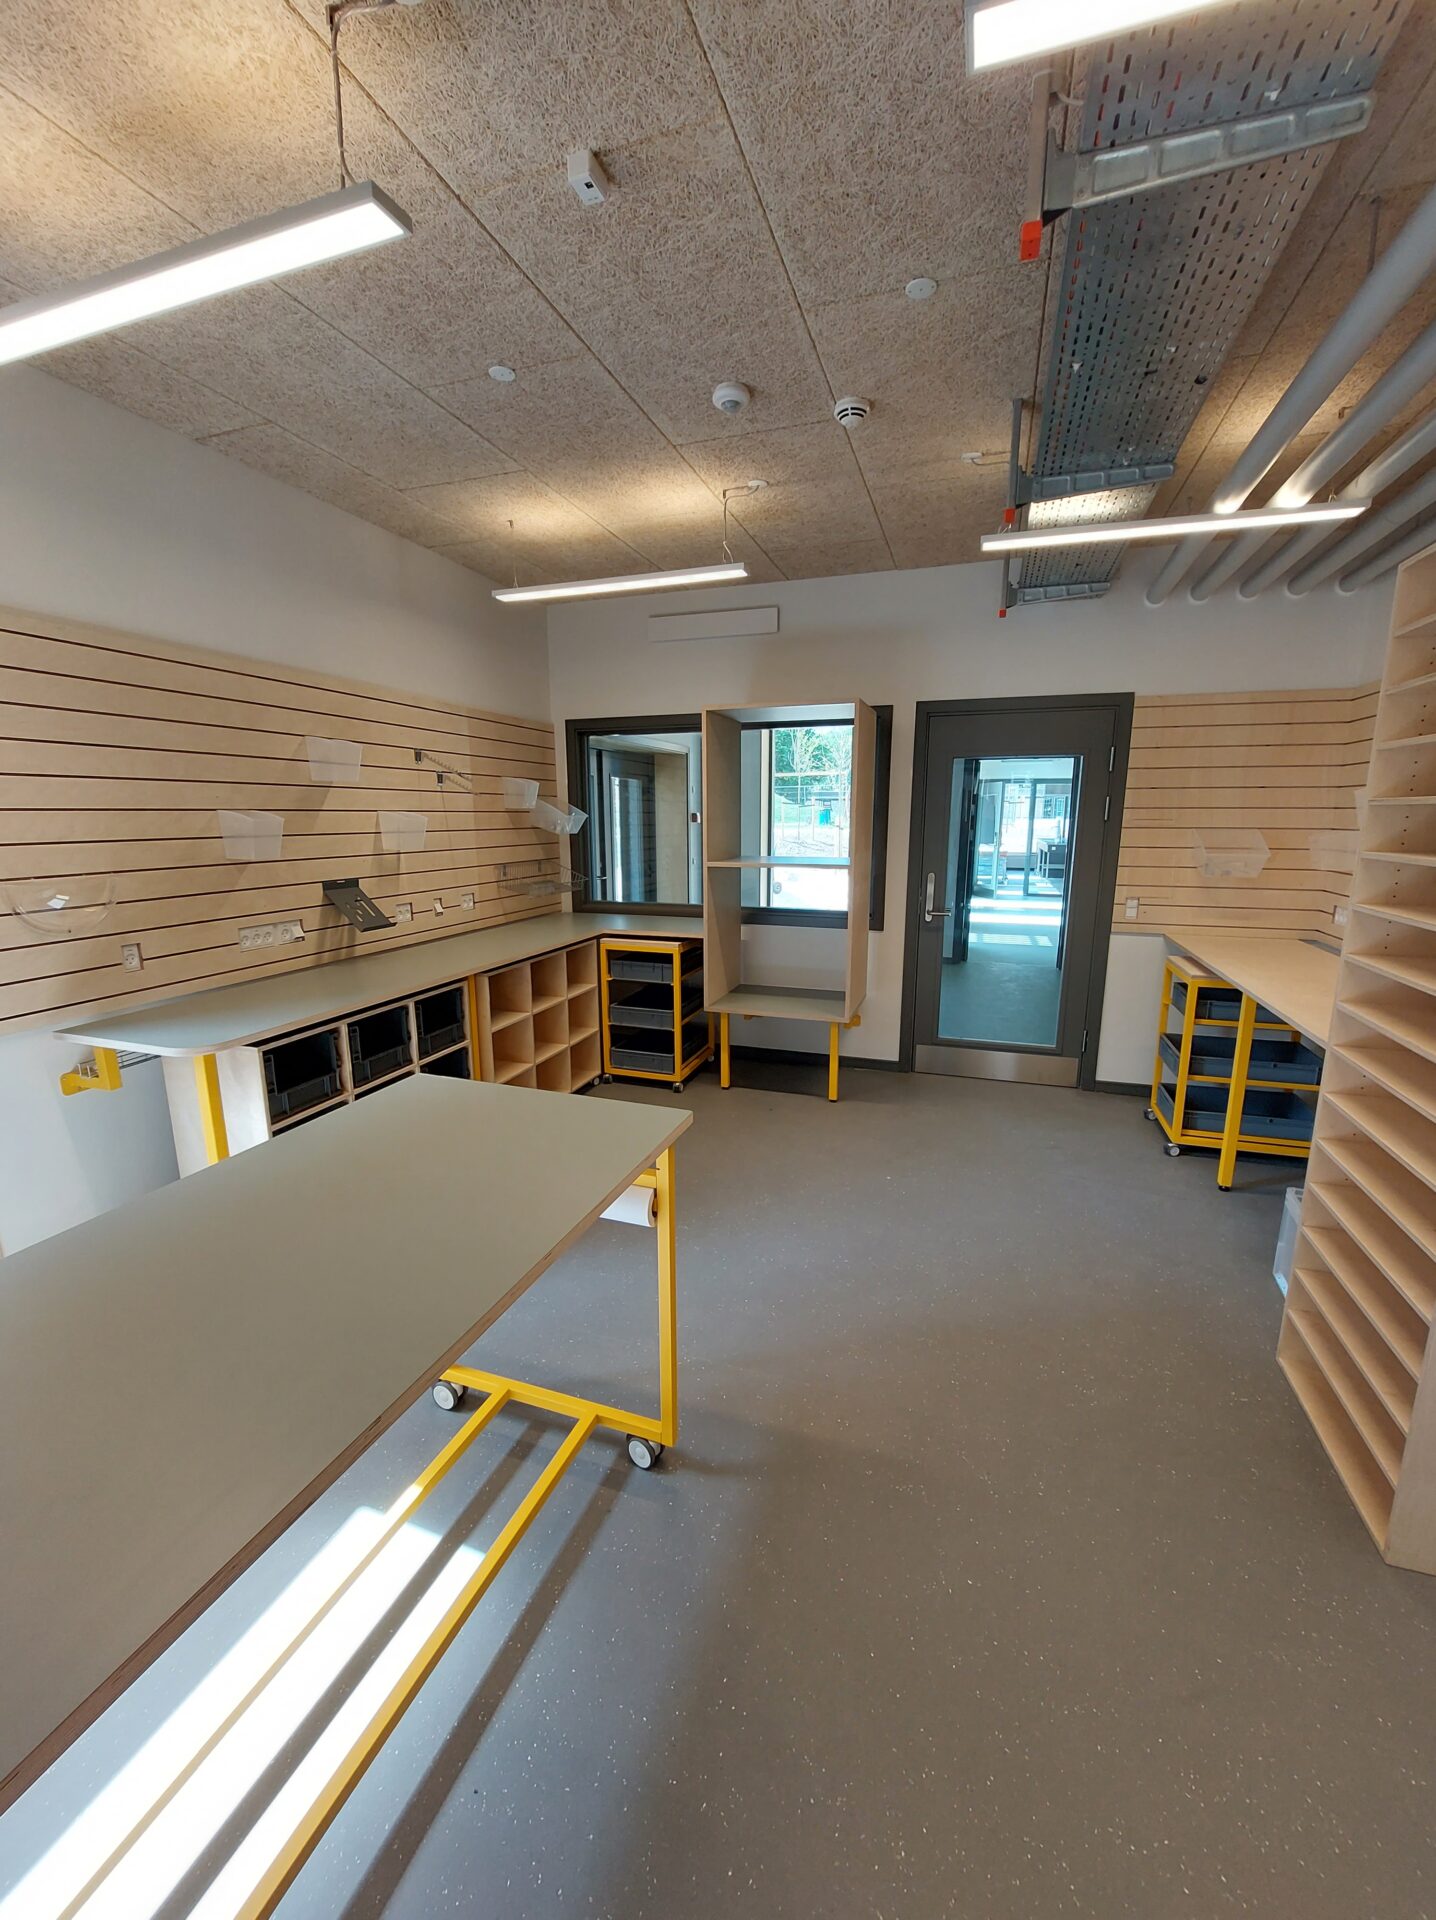 Makerspace - Osted Skole 3